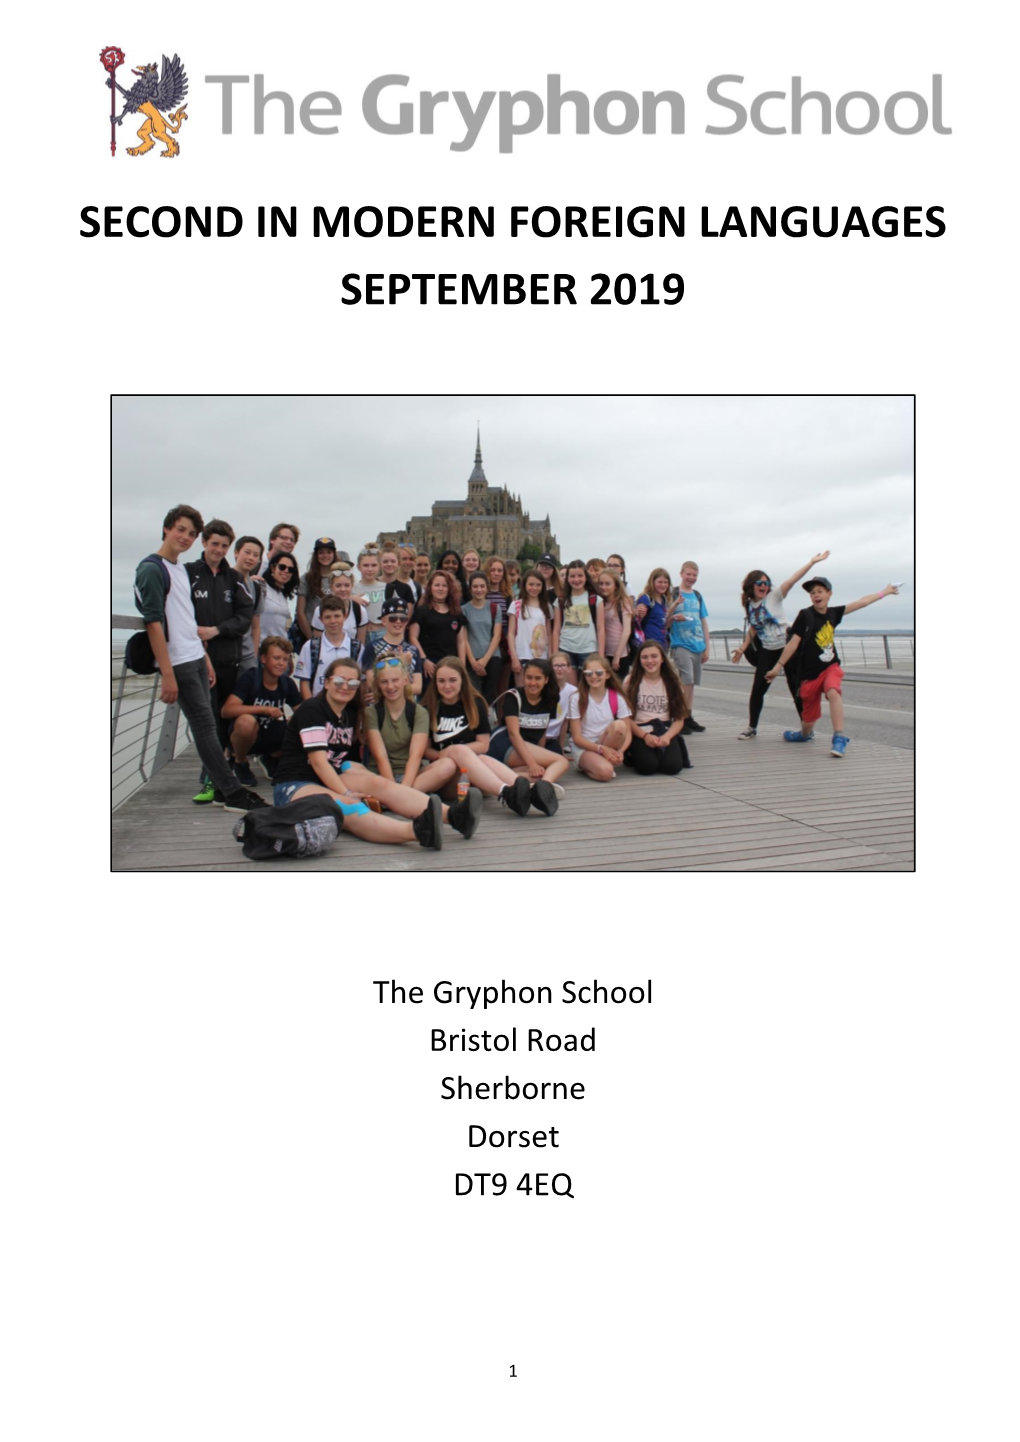 Second in Modern Foreign Languages September 2019